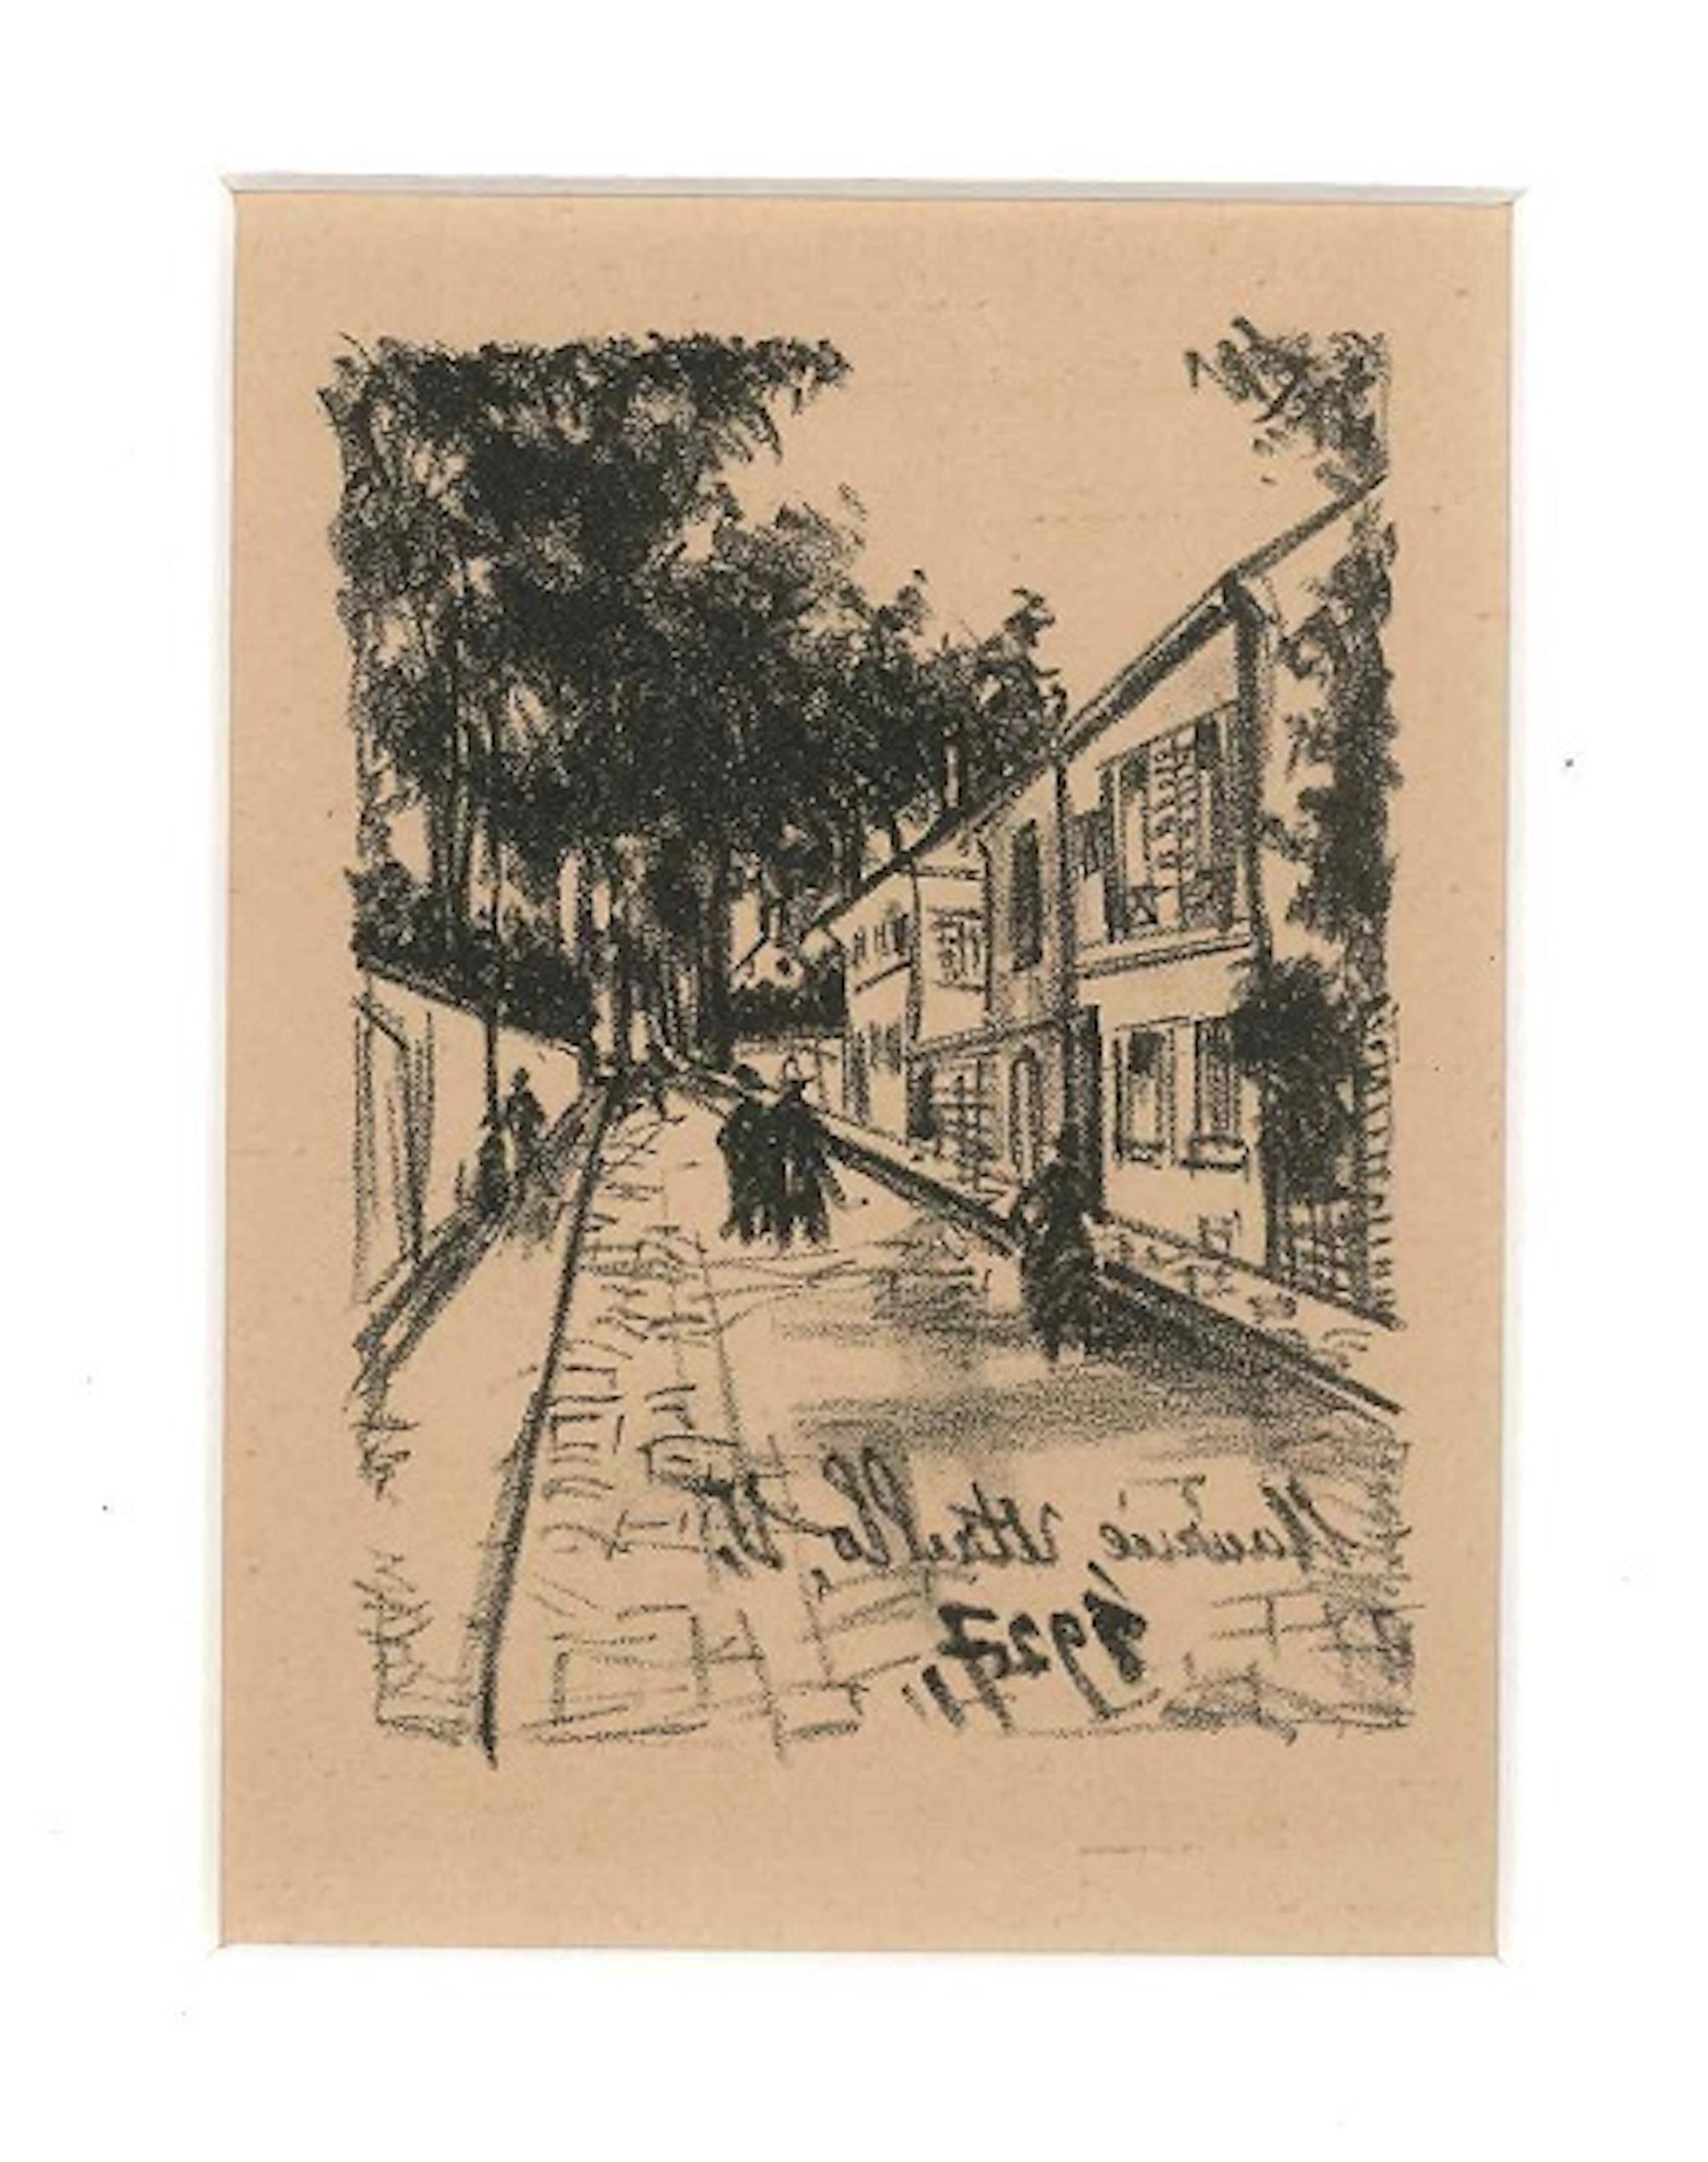 The Walk - Original Lithograph by Maurice Utrillo - 1927